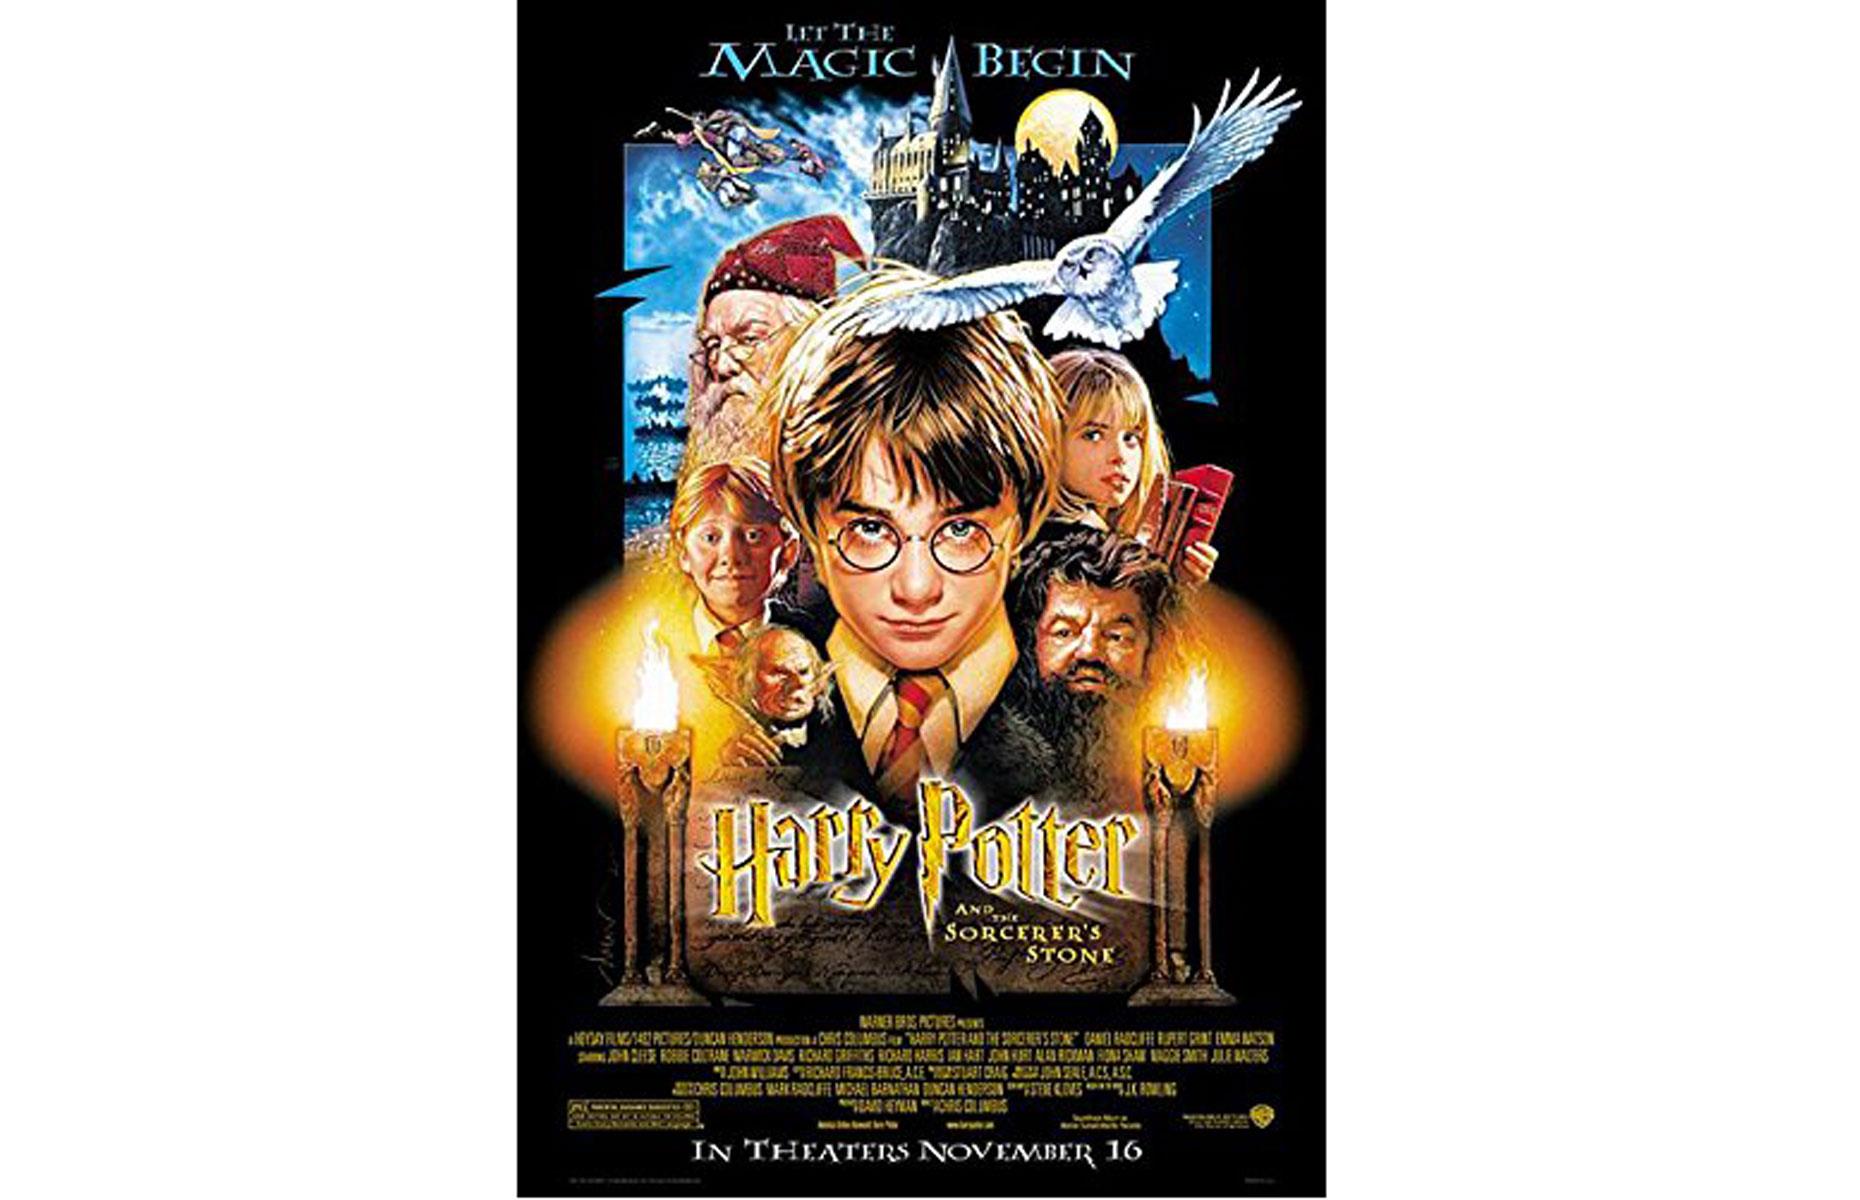 Harry Potter and the Sorcerer's Stone (American poster, 2001): up to $600 (£440)